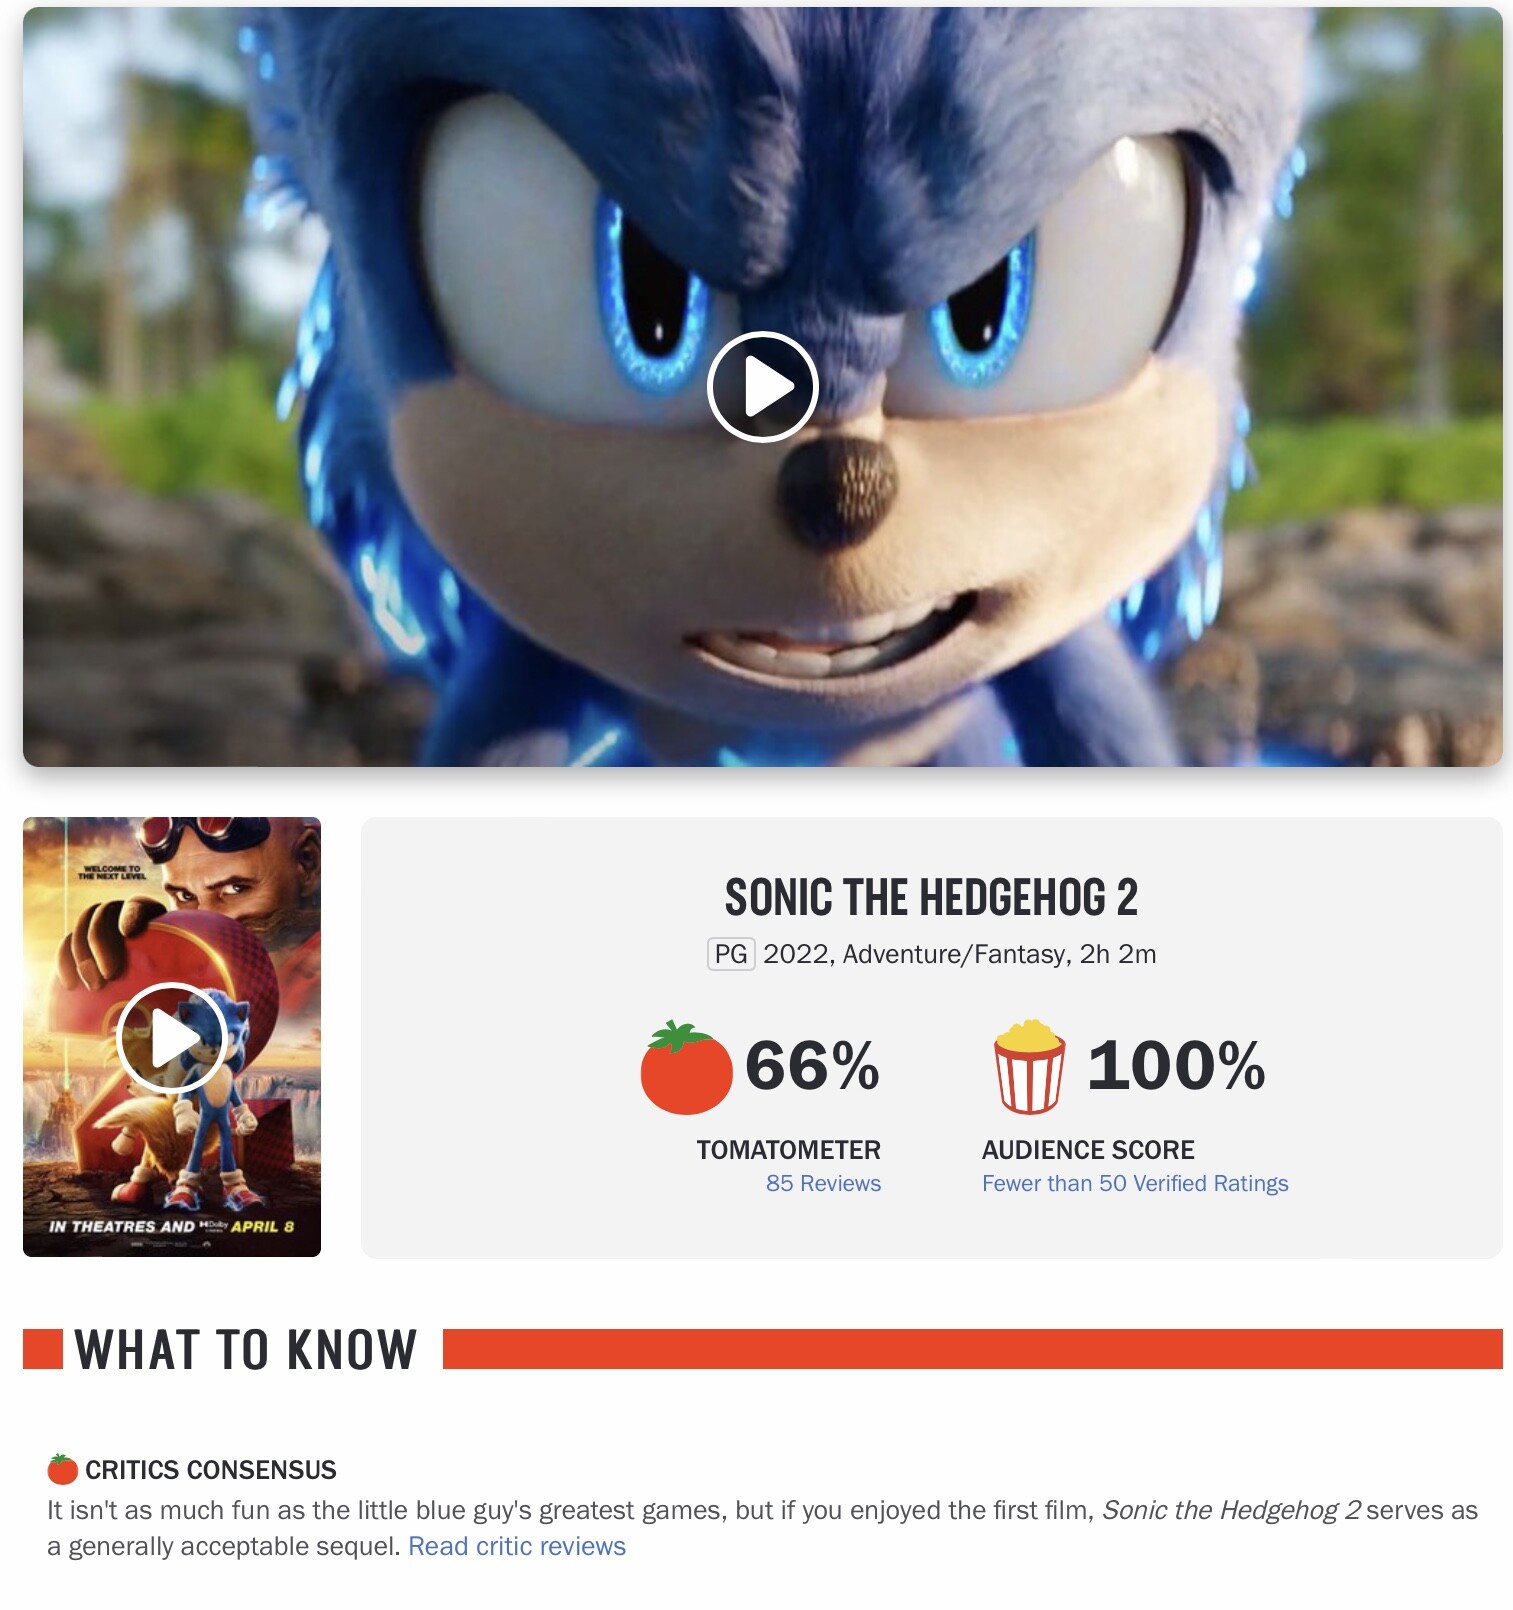 How Sonic 2's Rotten Tomatoes Score Compares to the First Movie